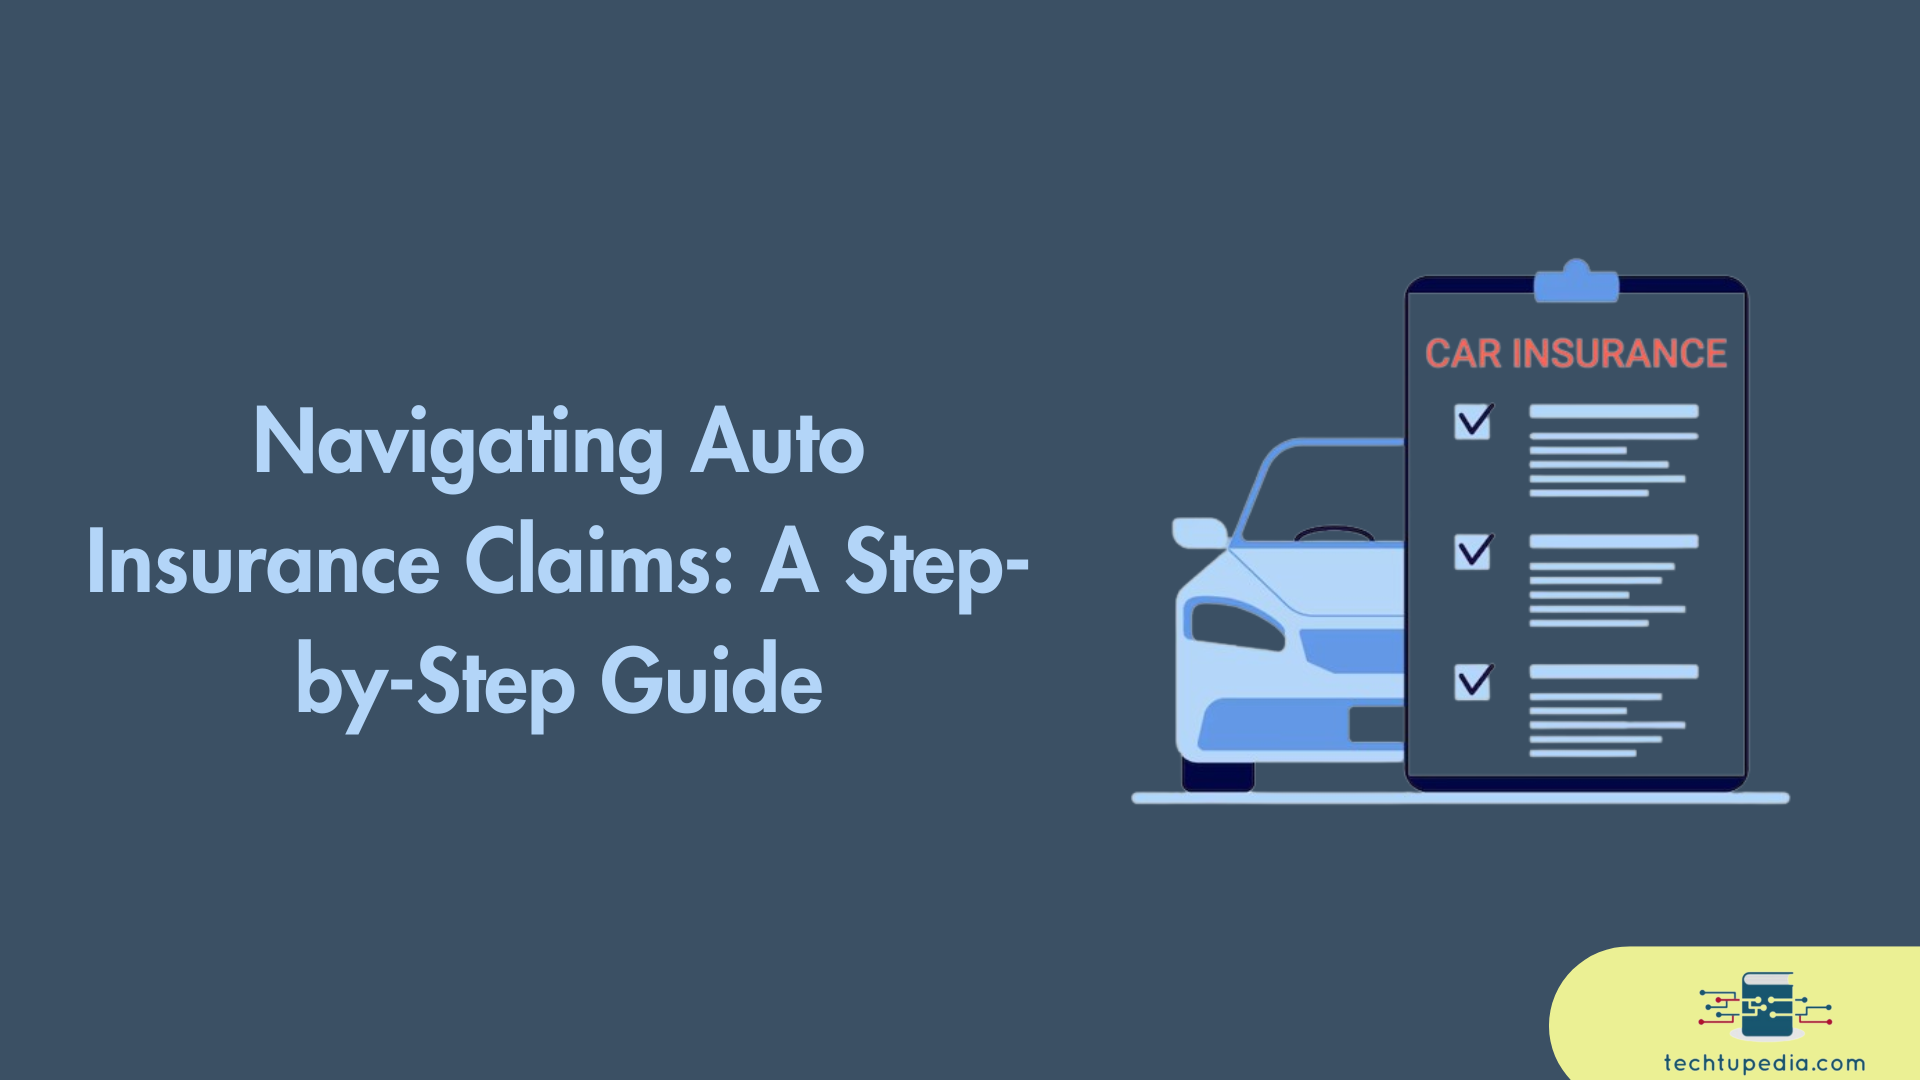 Navigating Auto Insurance Claims: A Step-by-Step Guide